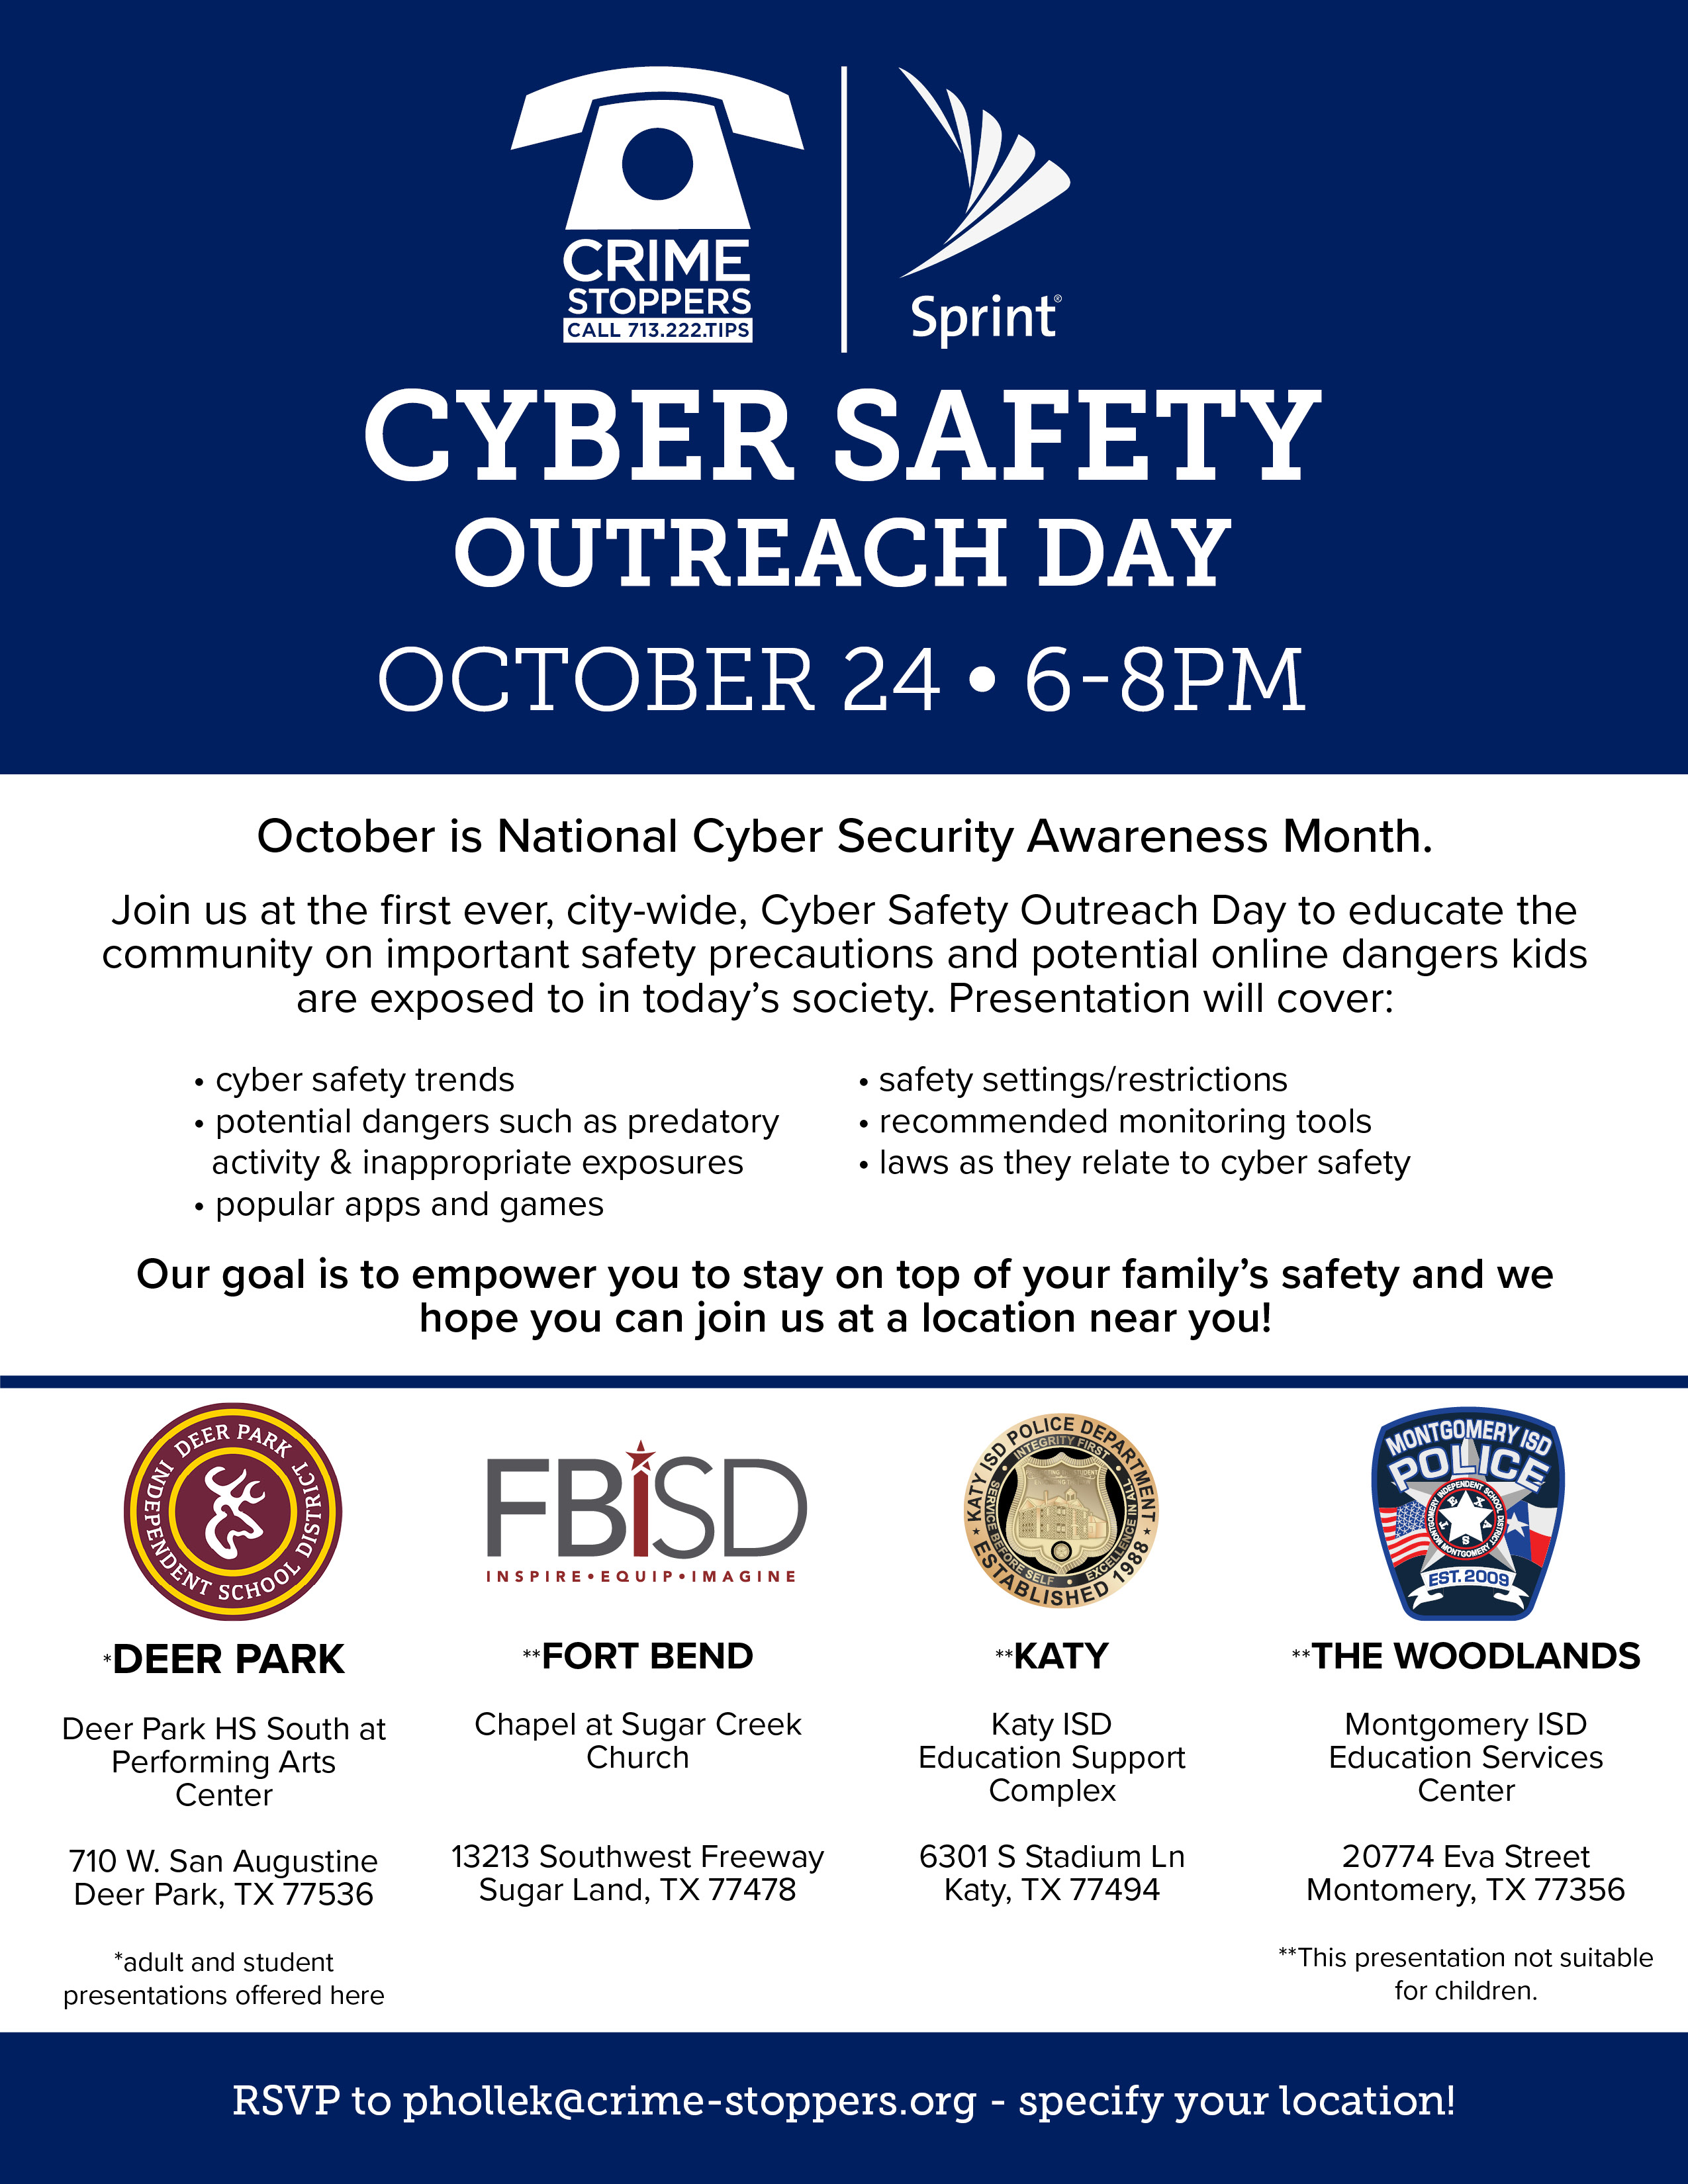 Cyber Safety Outreach Day Flyer 2019 Houston Crime Stoppers